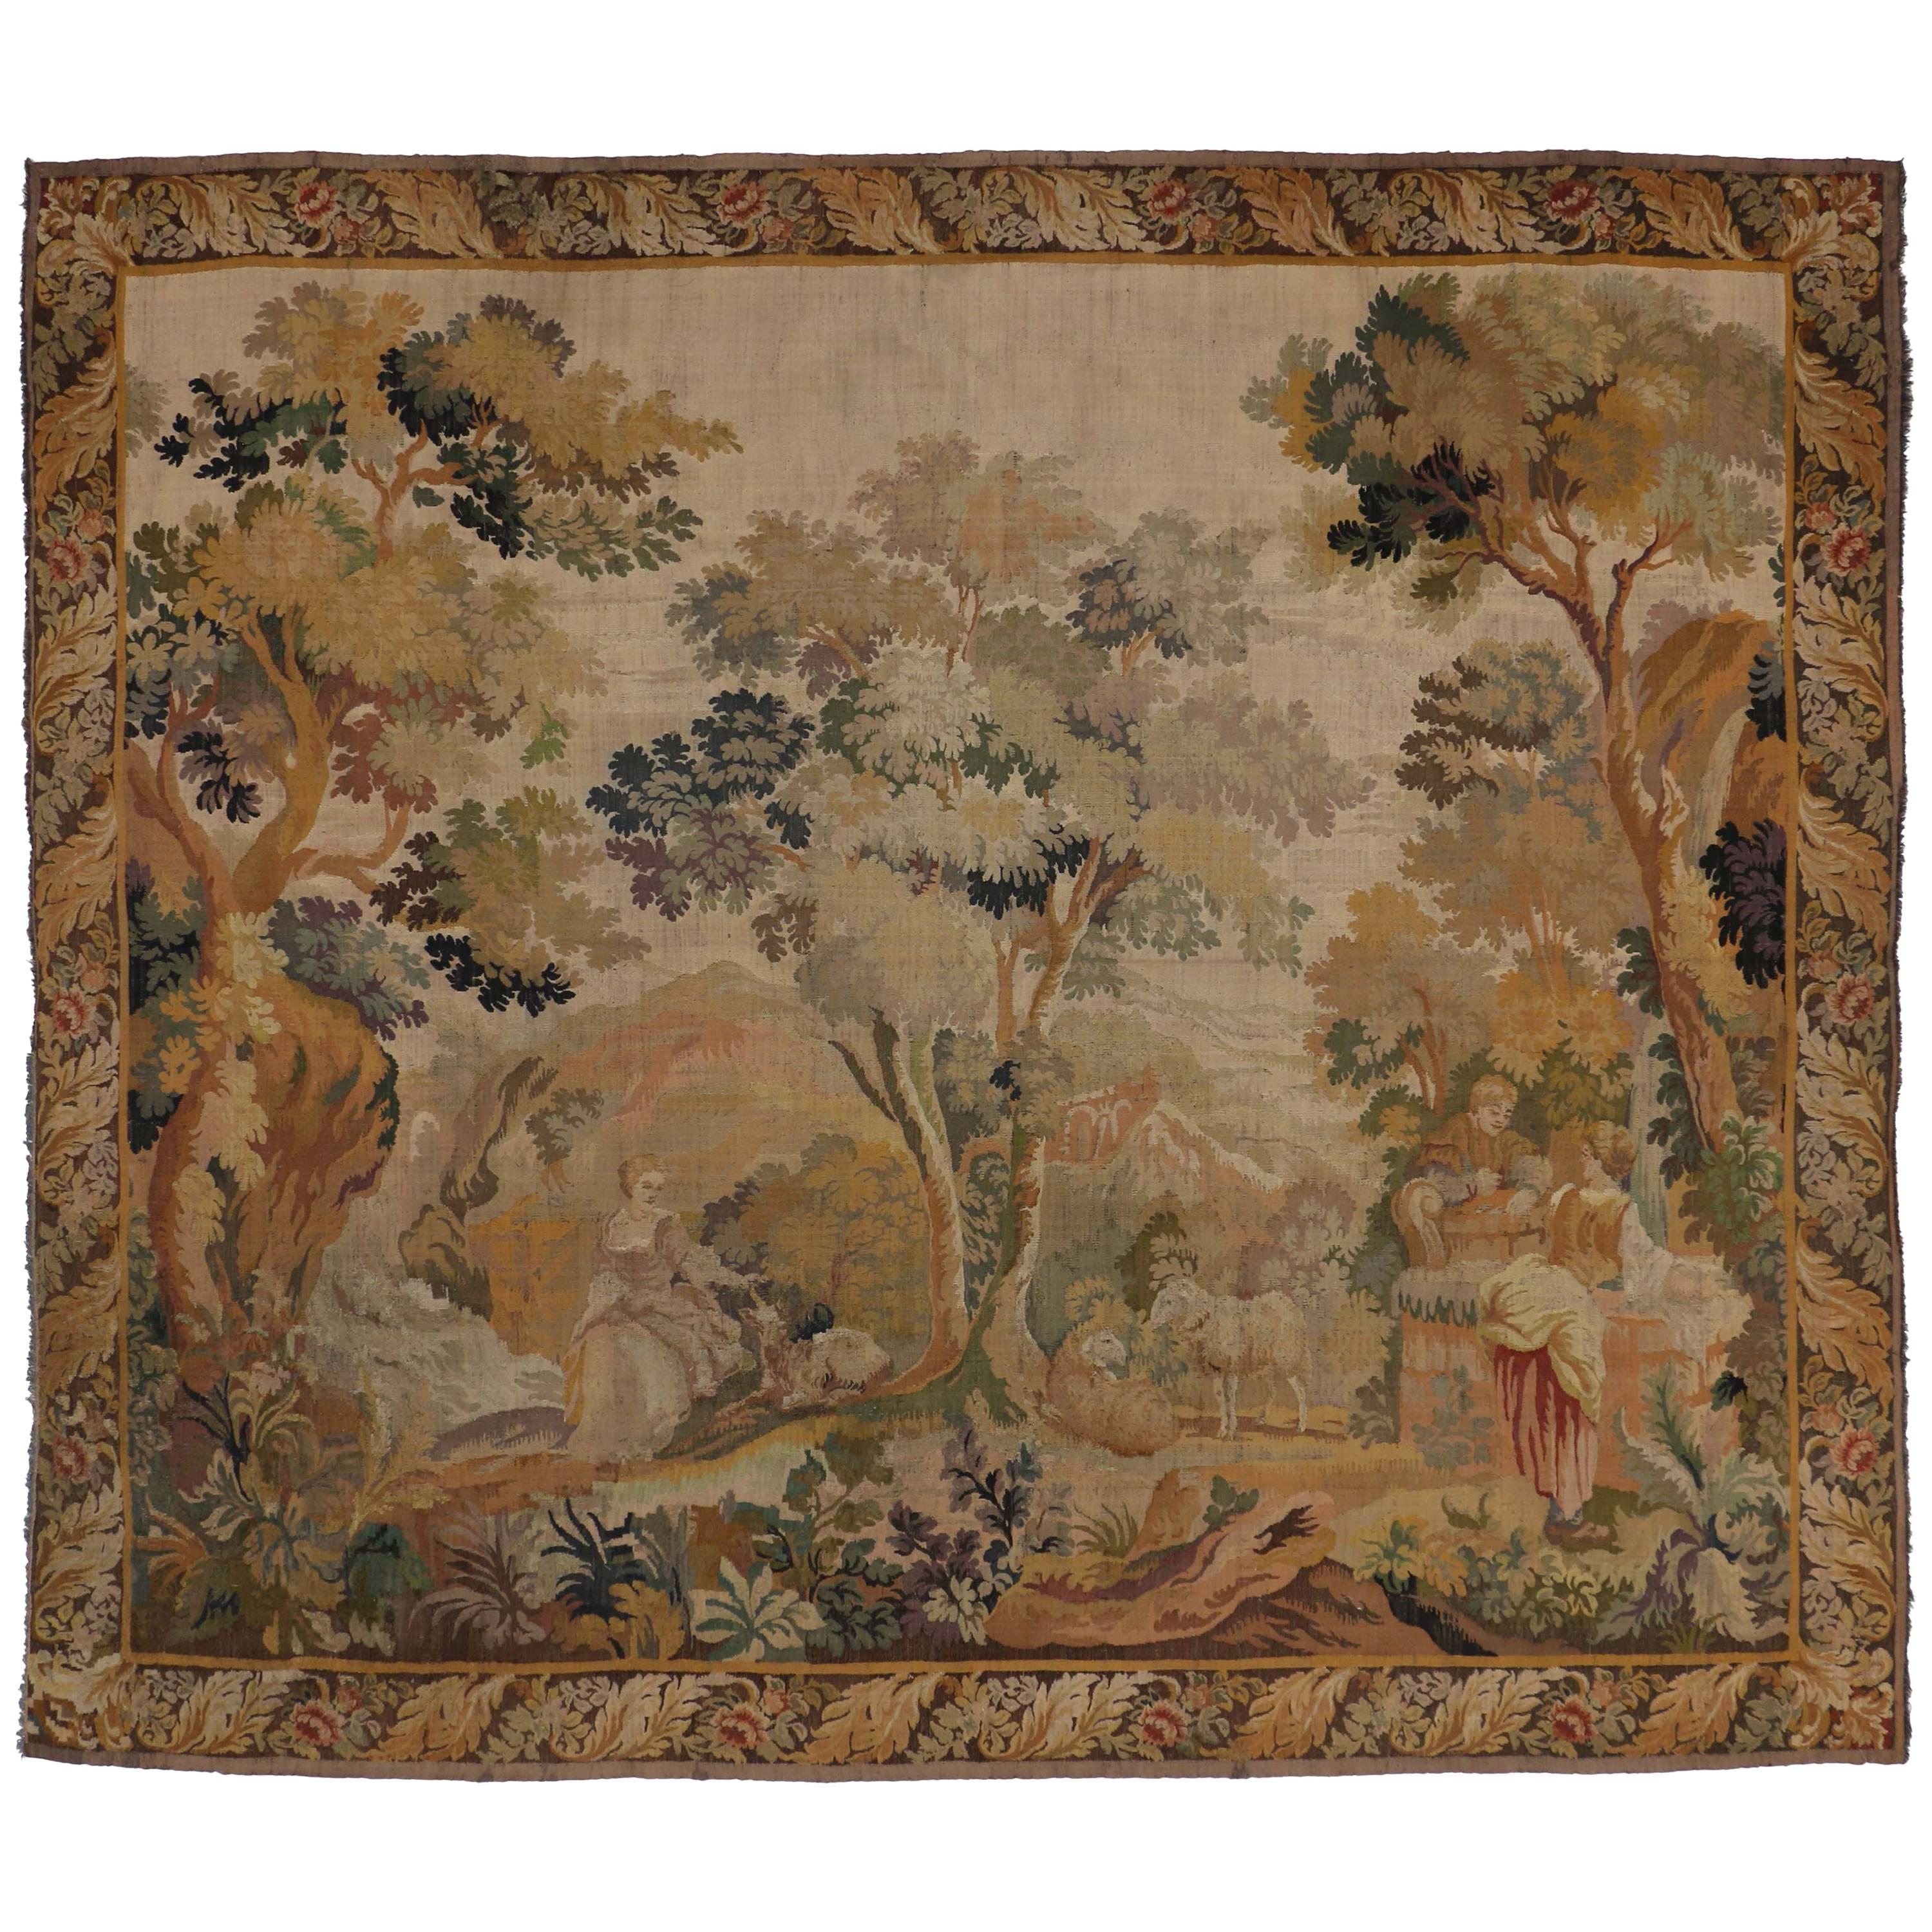 Antique French Rococo Noble Pastoral Style Tapestry Inspired by Francois Boucher